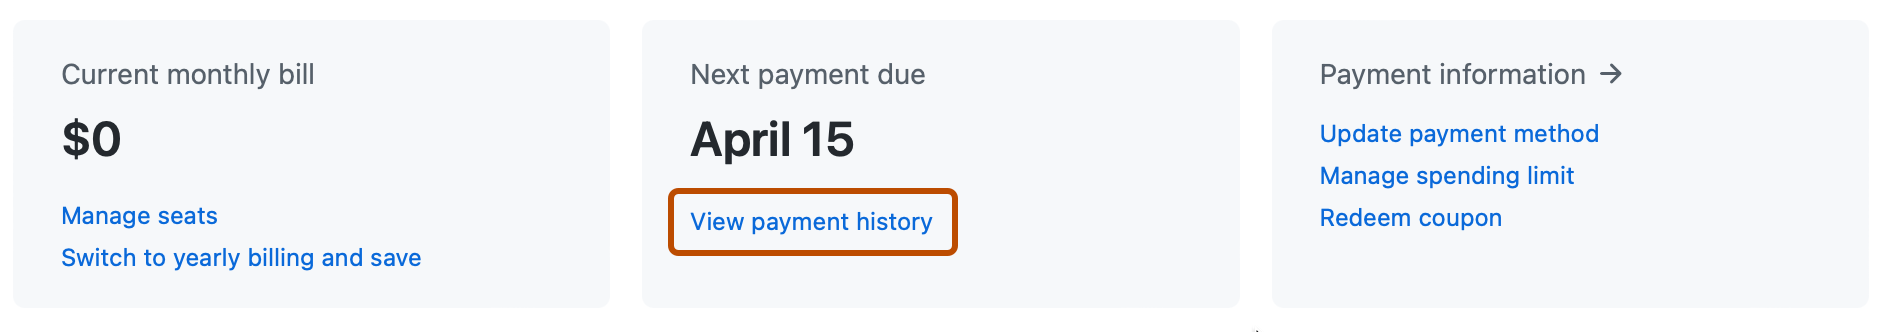 View payment history link